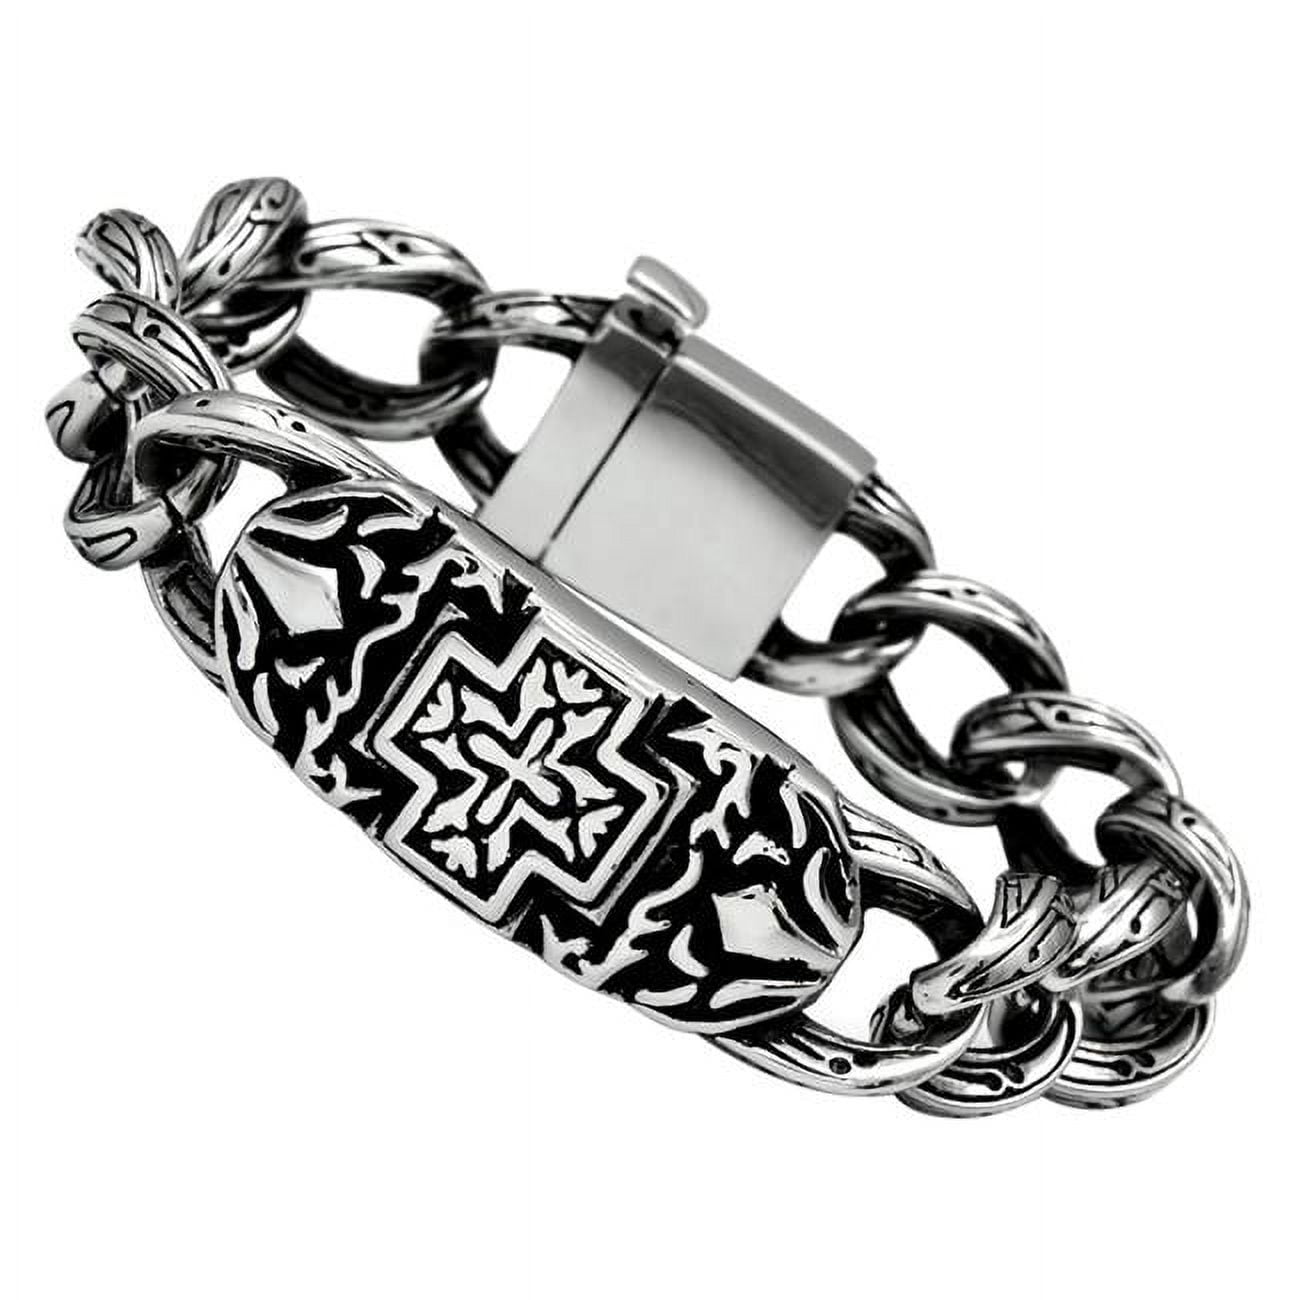 Picture of Alamode TK443-8.5 8.5 in. High Polished No Plating Stainless Steel Bracelet with No Stone